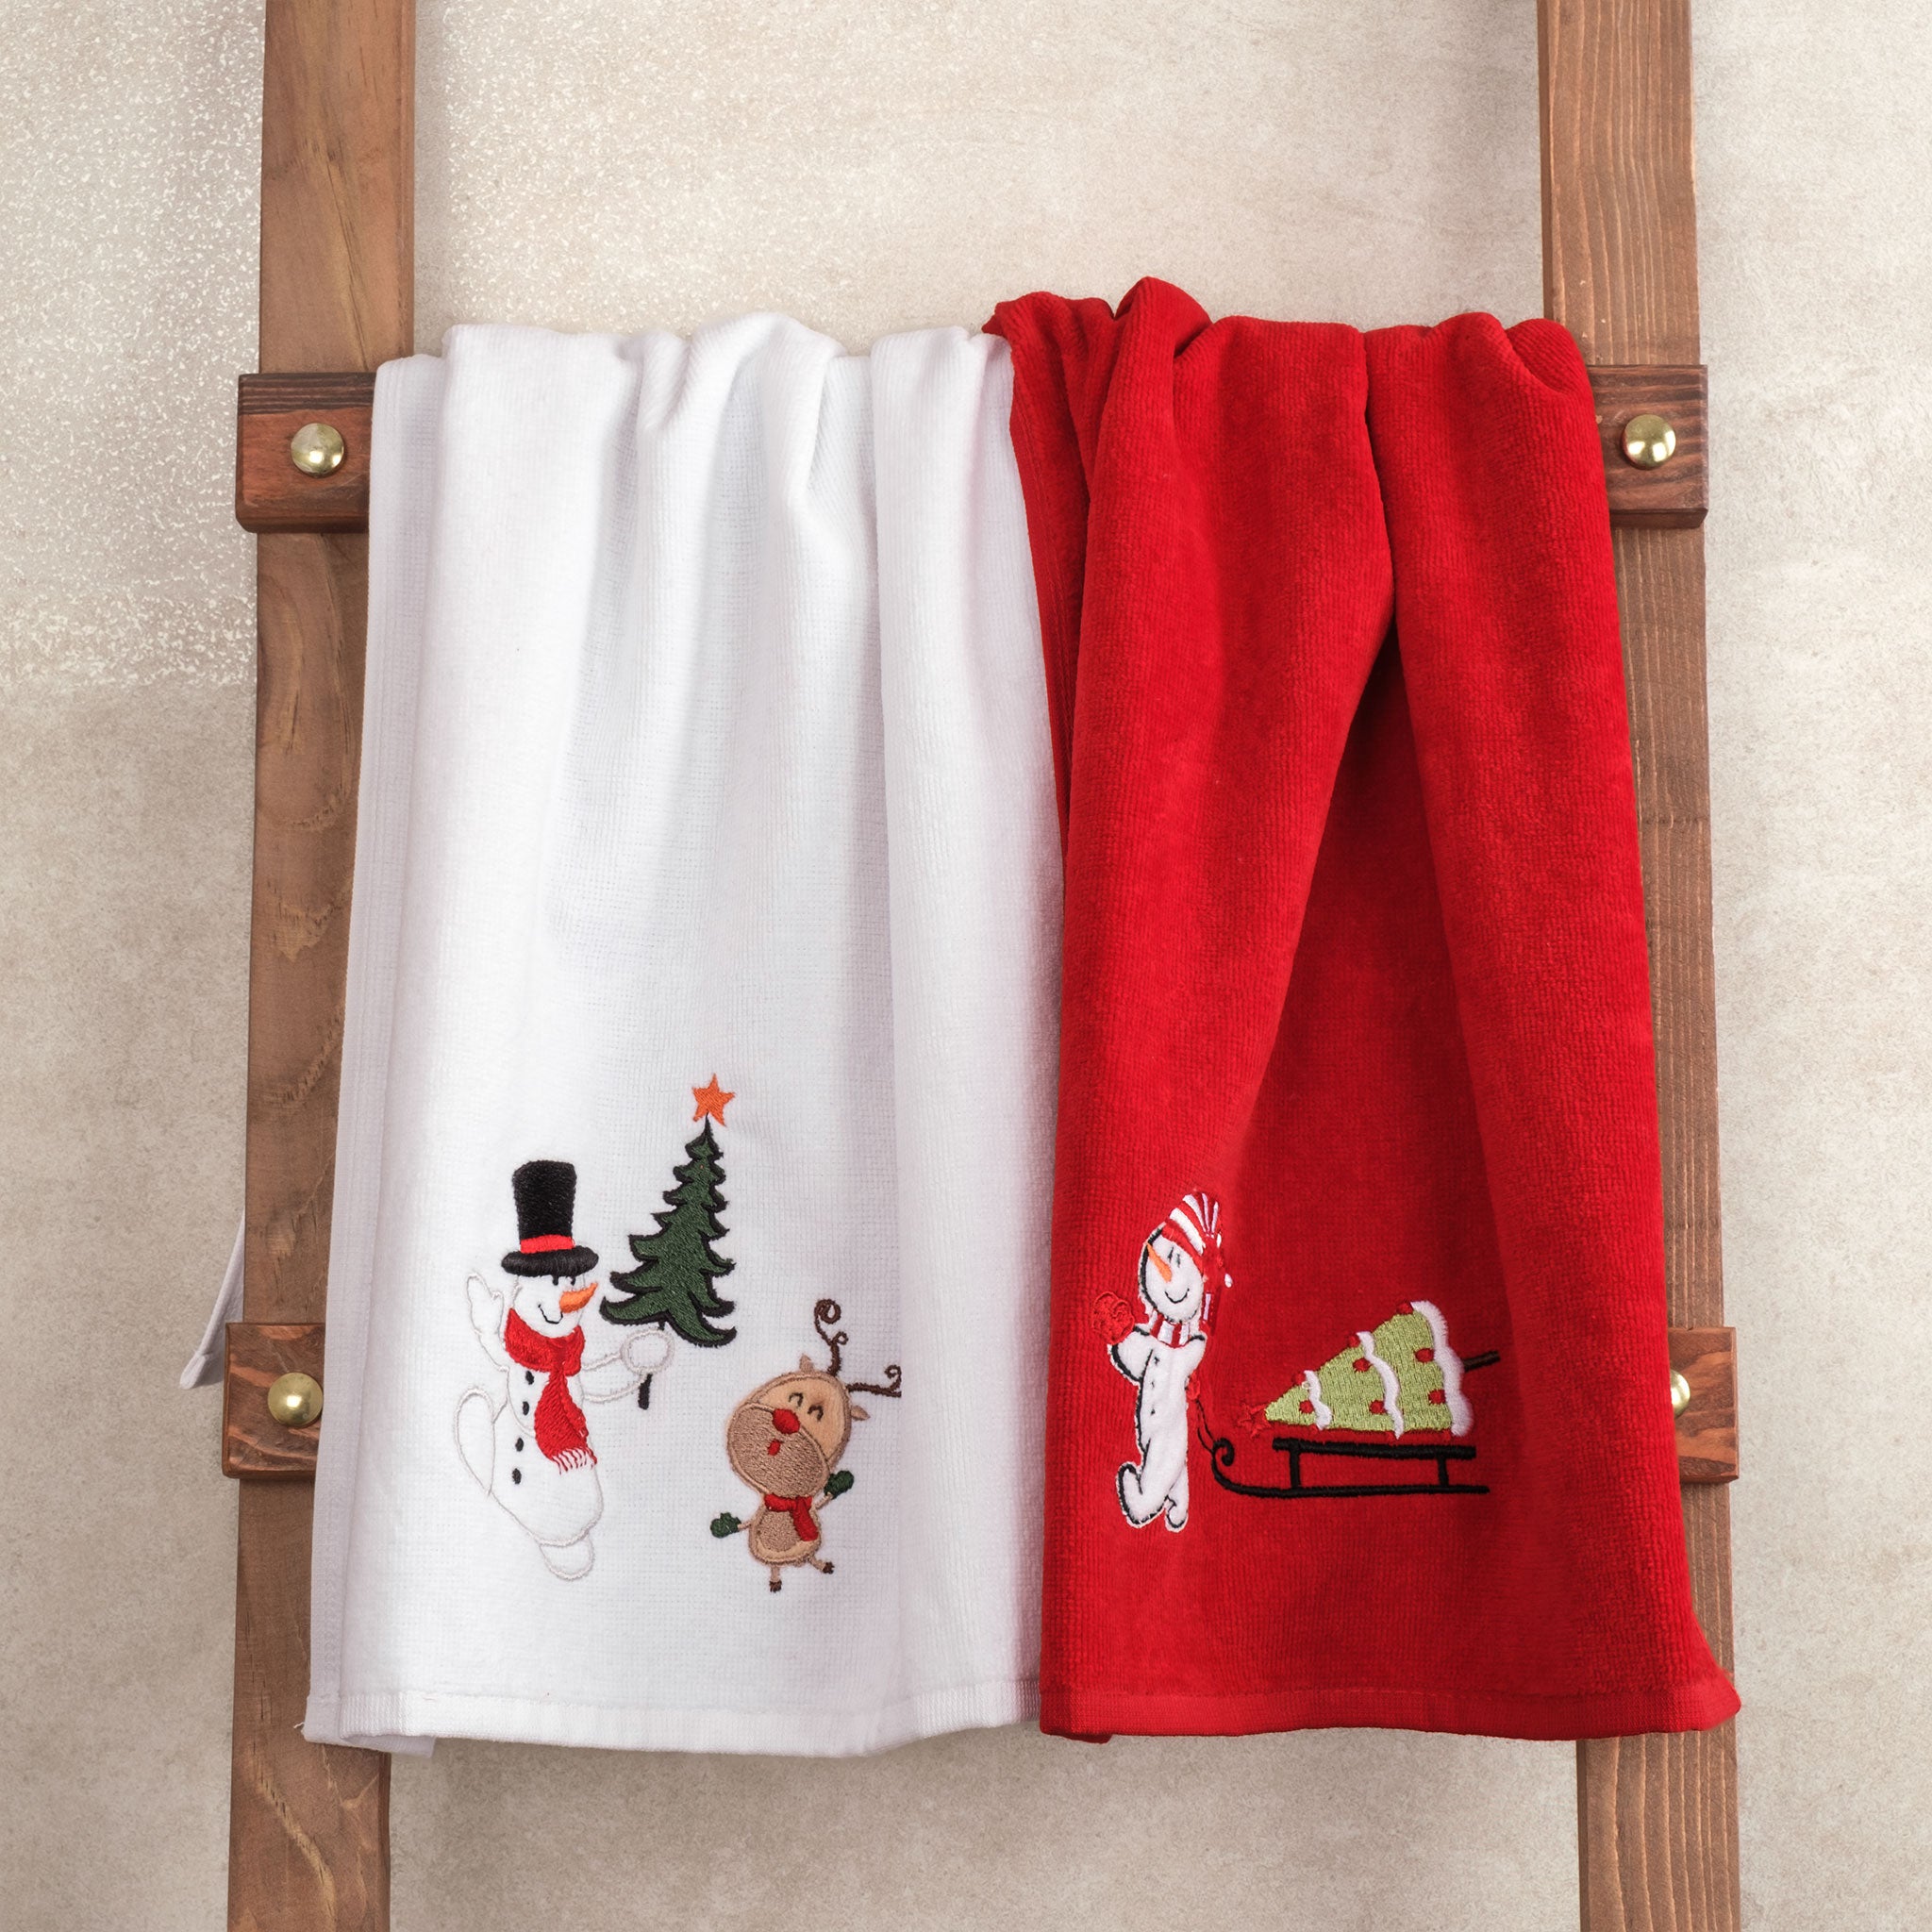 American Soft Linen - Christmas Towels 2 Packed Embroidered Towels for Decor Xmas - Snowmen - 1